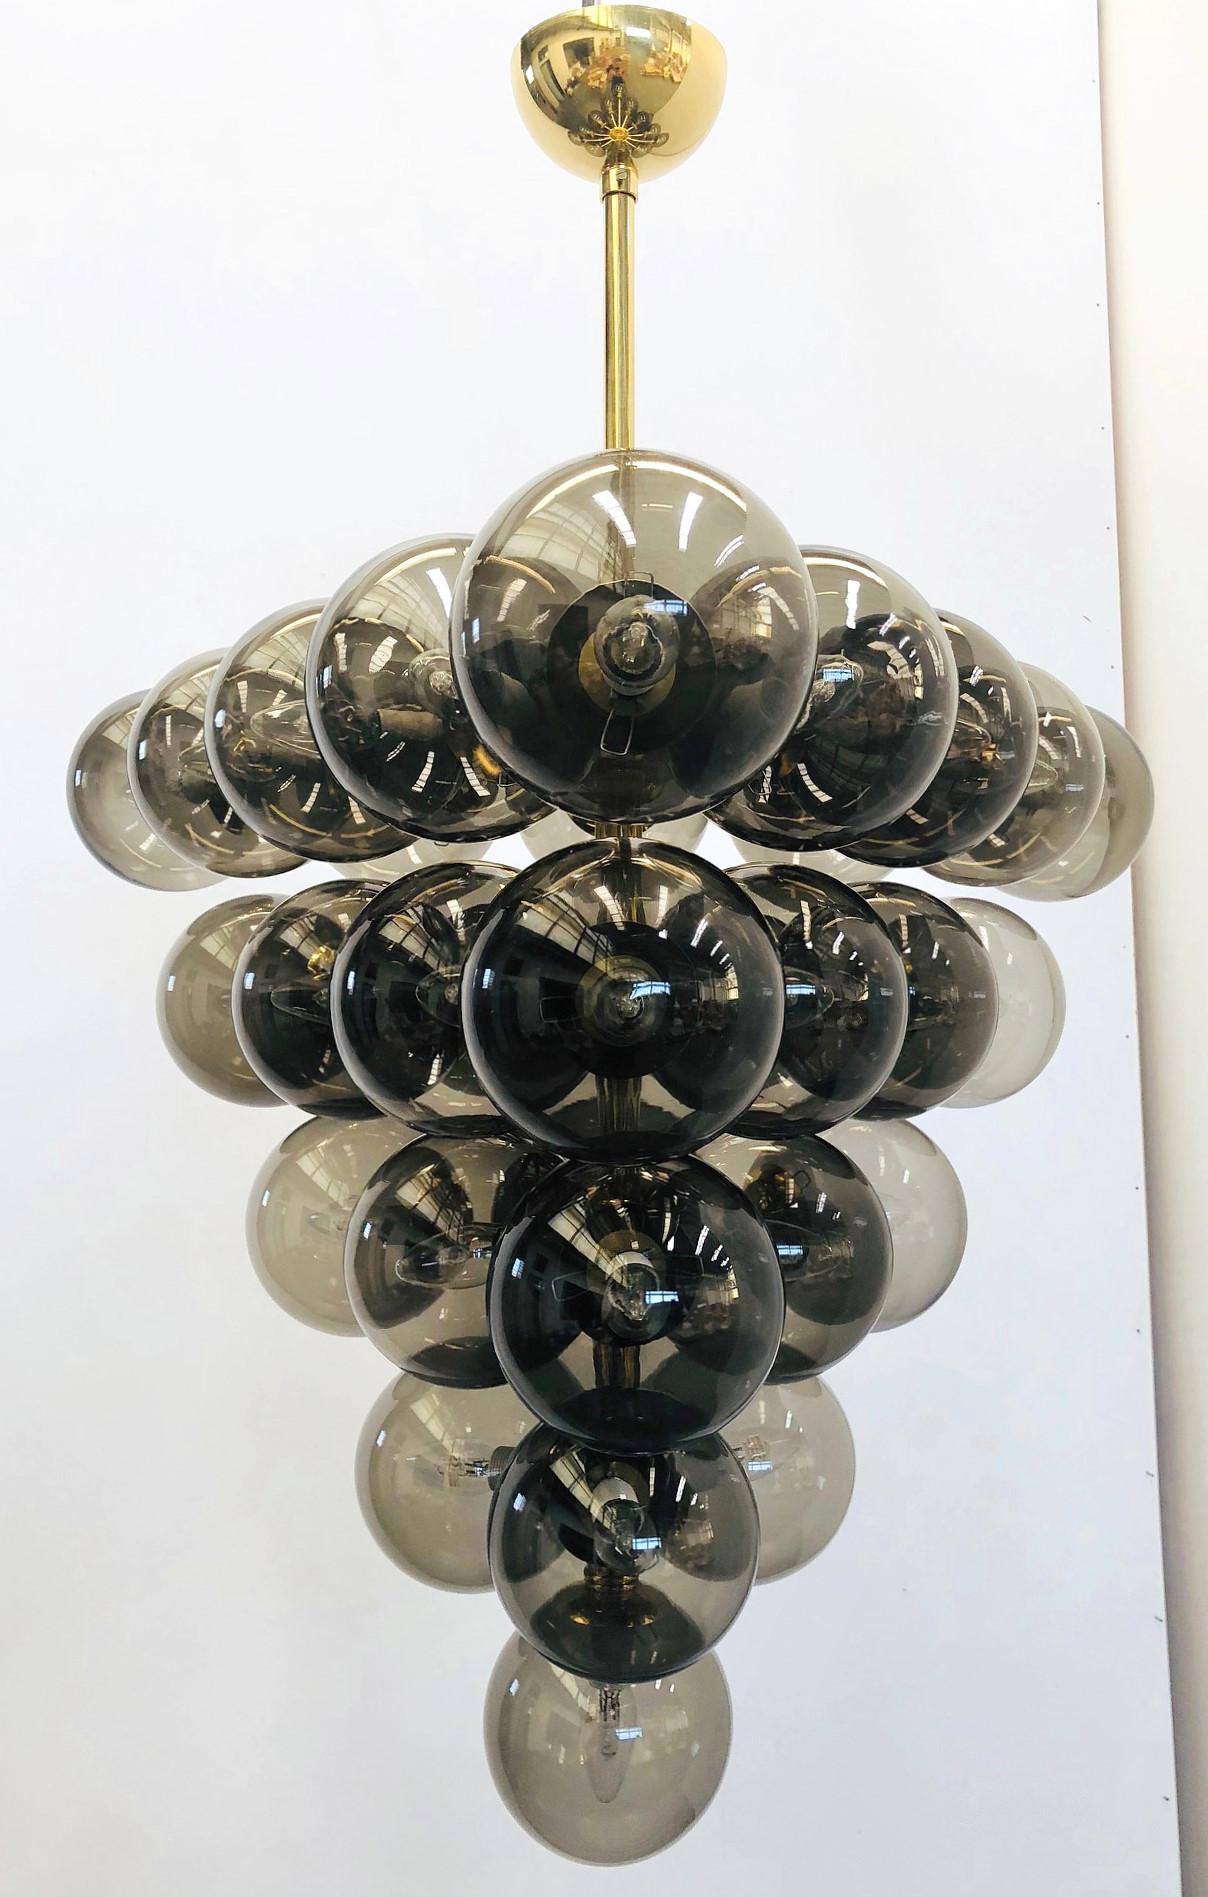 Italian chandelier with smoky Murano glass globes mounted on polished brass frame / Designed by Fabio Bergomi for Fabio Ltd / Made in Italy
31 lights / E12 or E14 type / max 40W each
Diameter: 31.5 inches / Height: 31.5 inches not including rod and